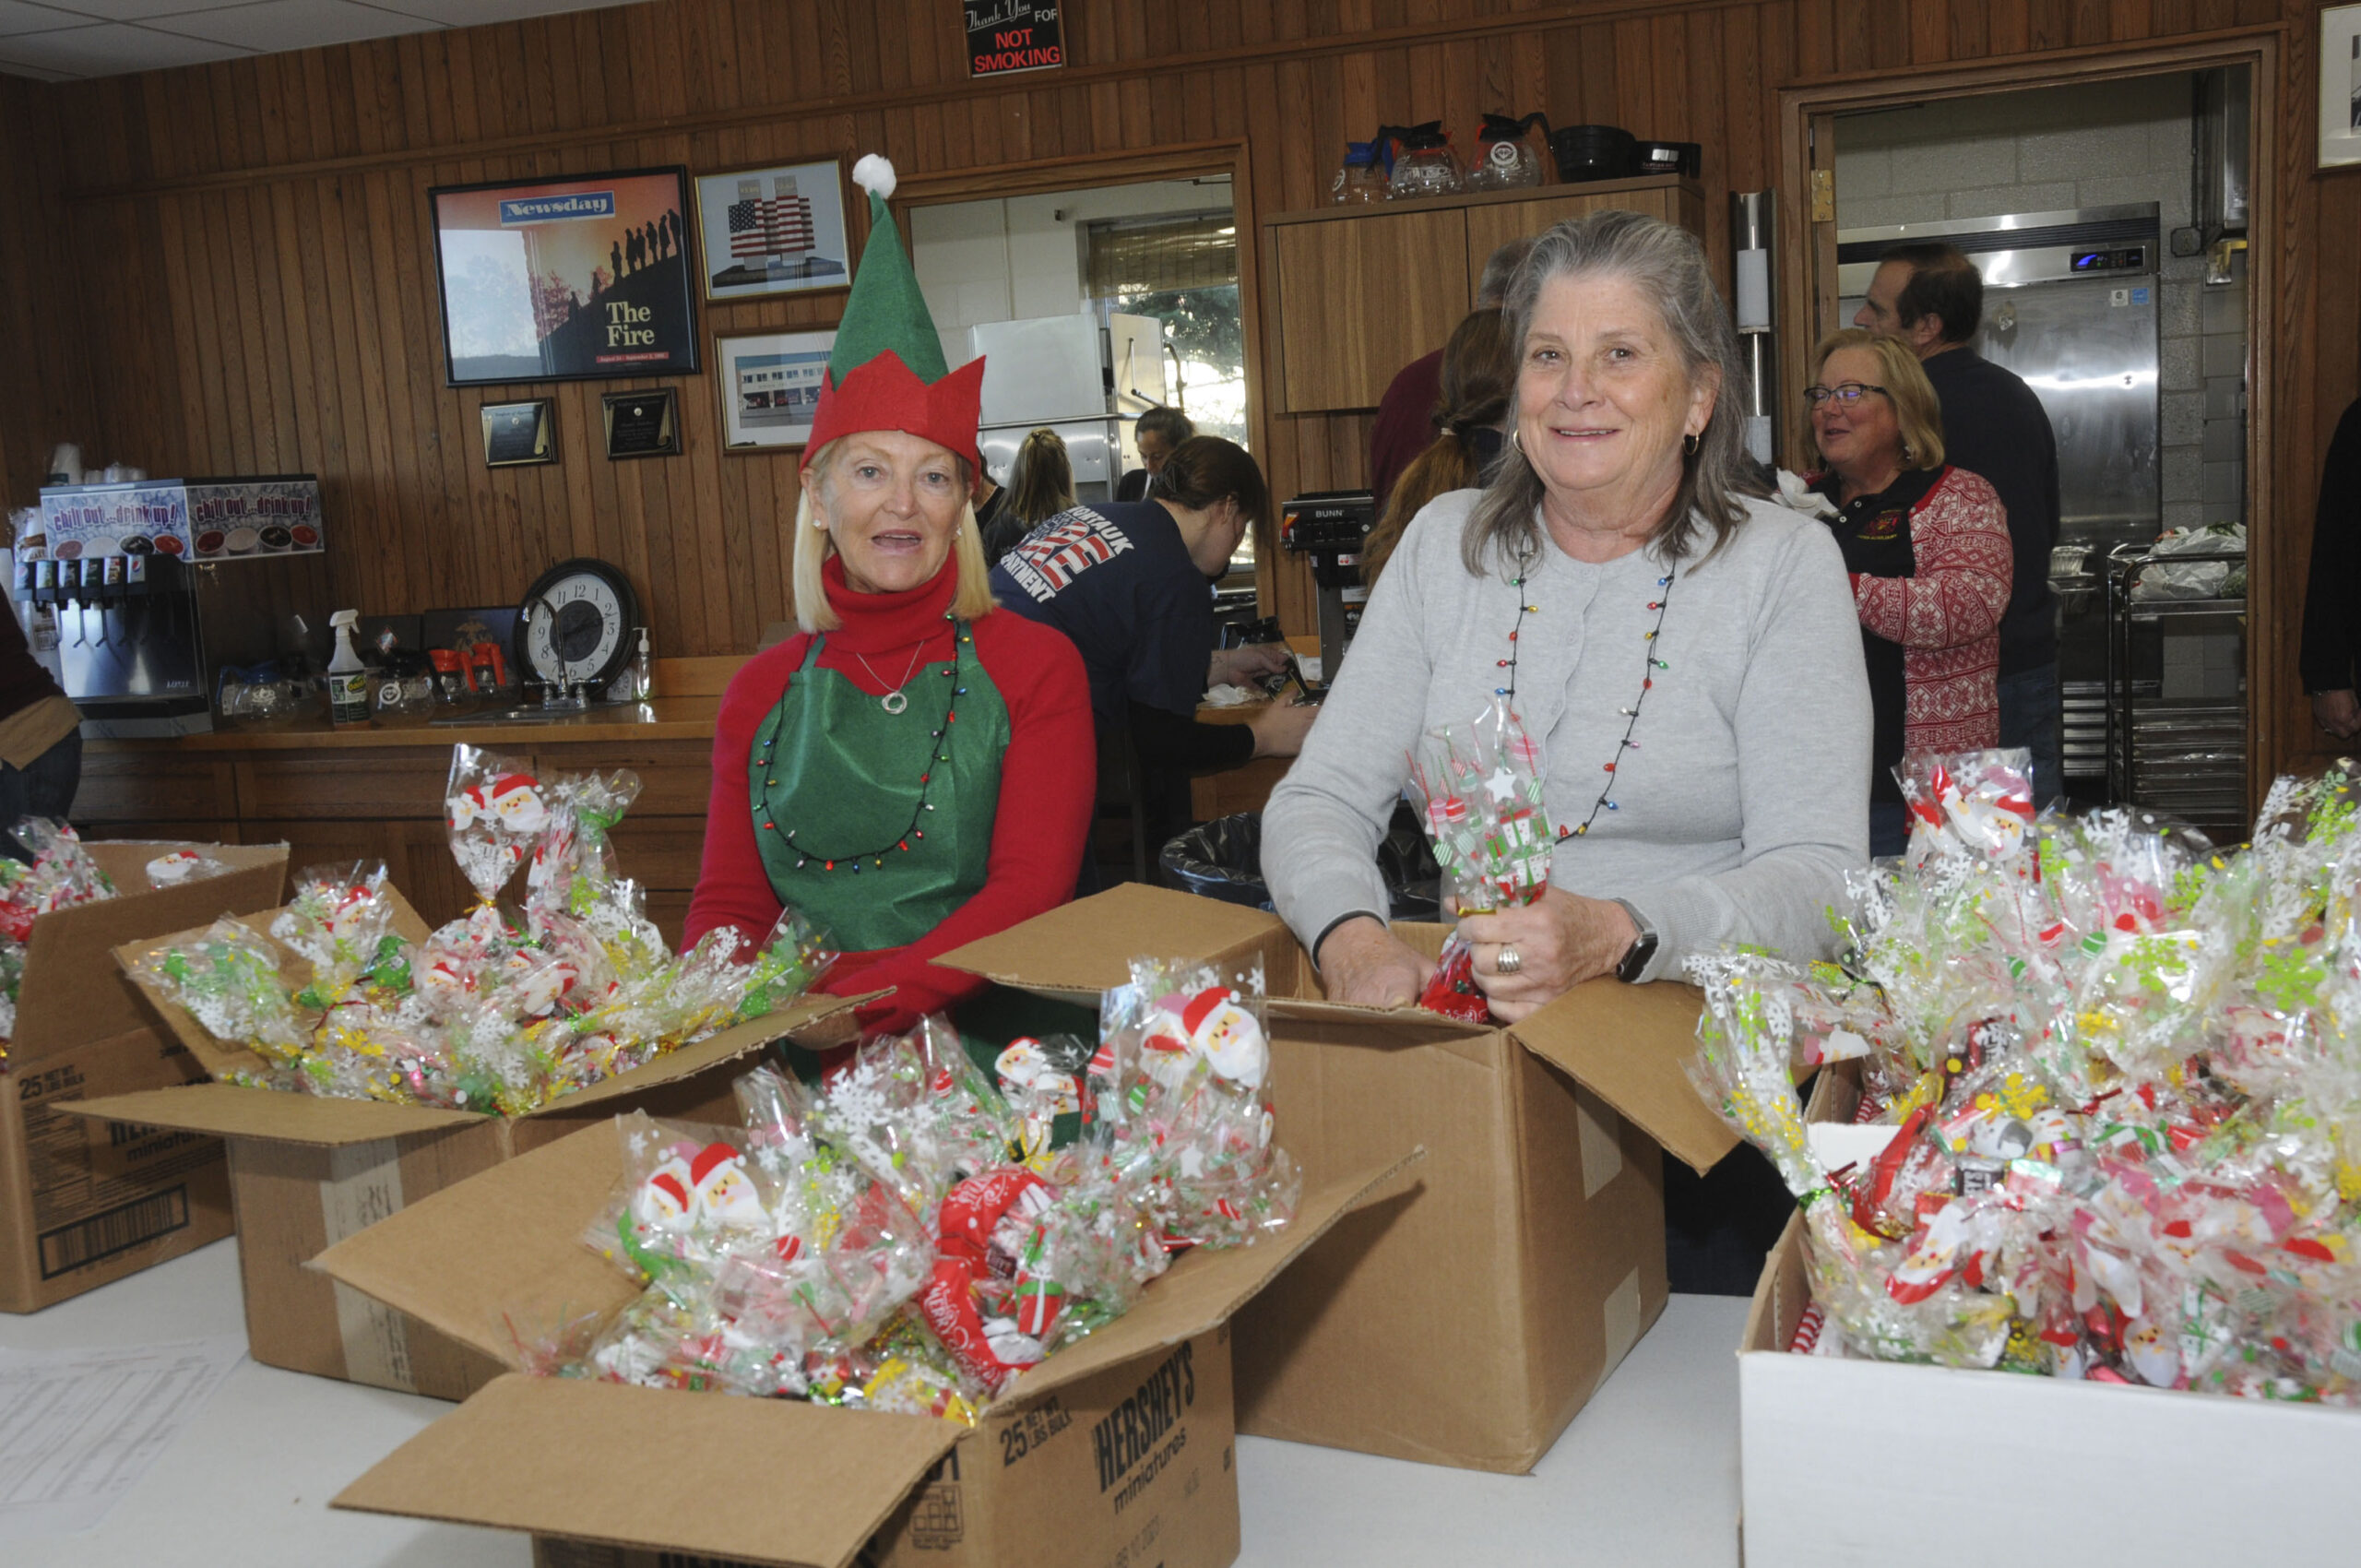 Elise Prado and Debbie Kennedy at the Montauk Fire Department's annual dinner for Seniors on Sunday. Equipment bays were cleared out to make room for festive dinner tables. MFD volunteers handed out 